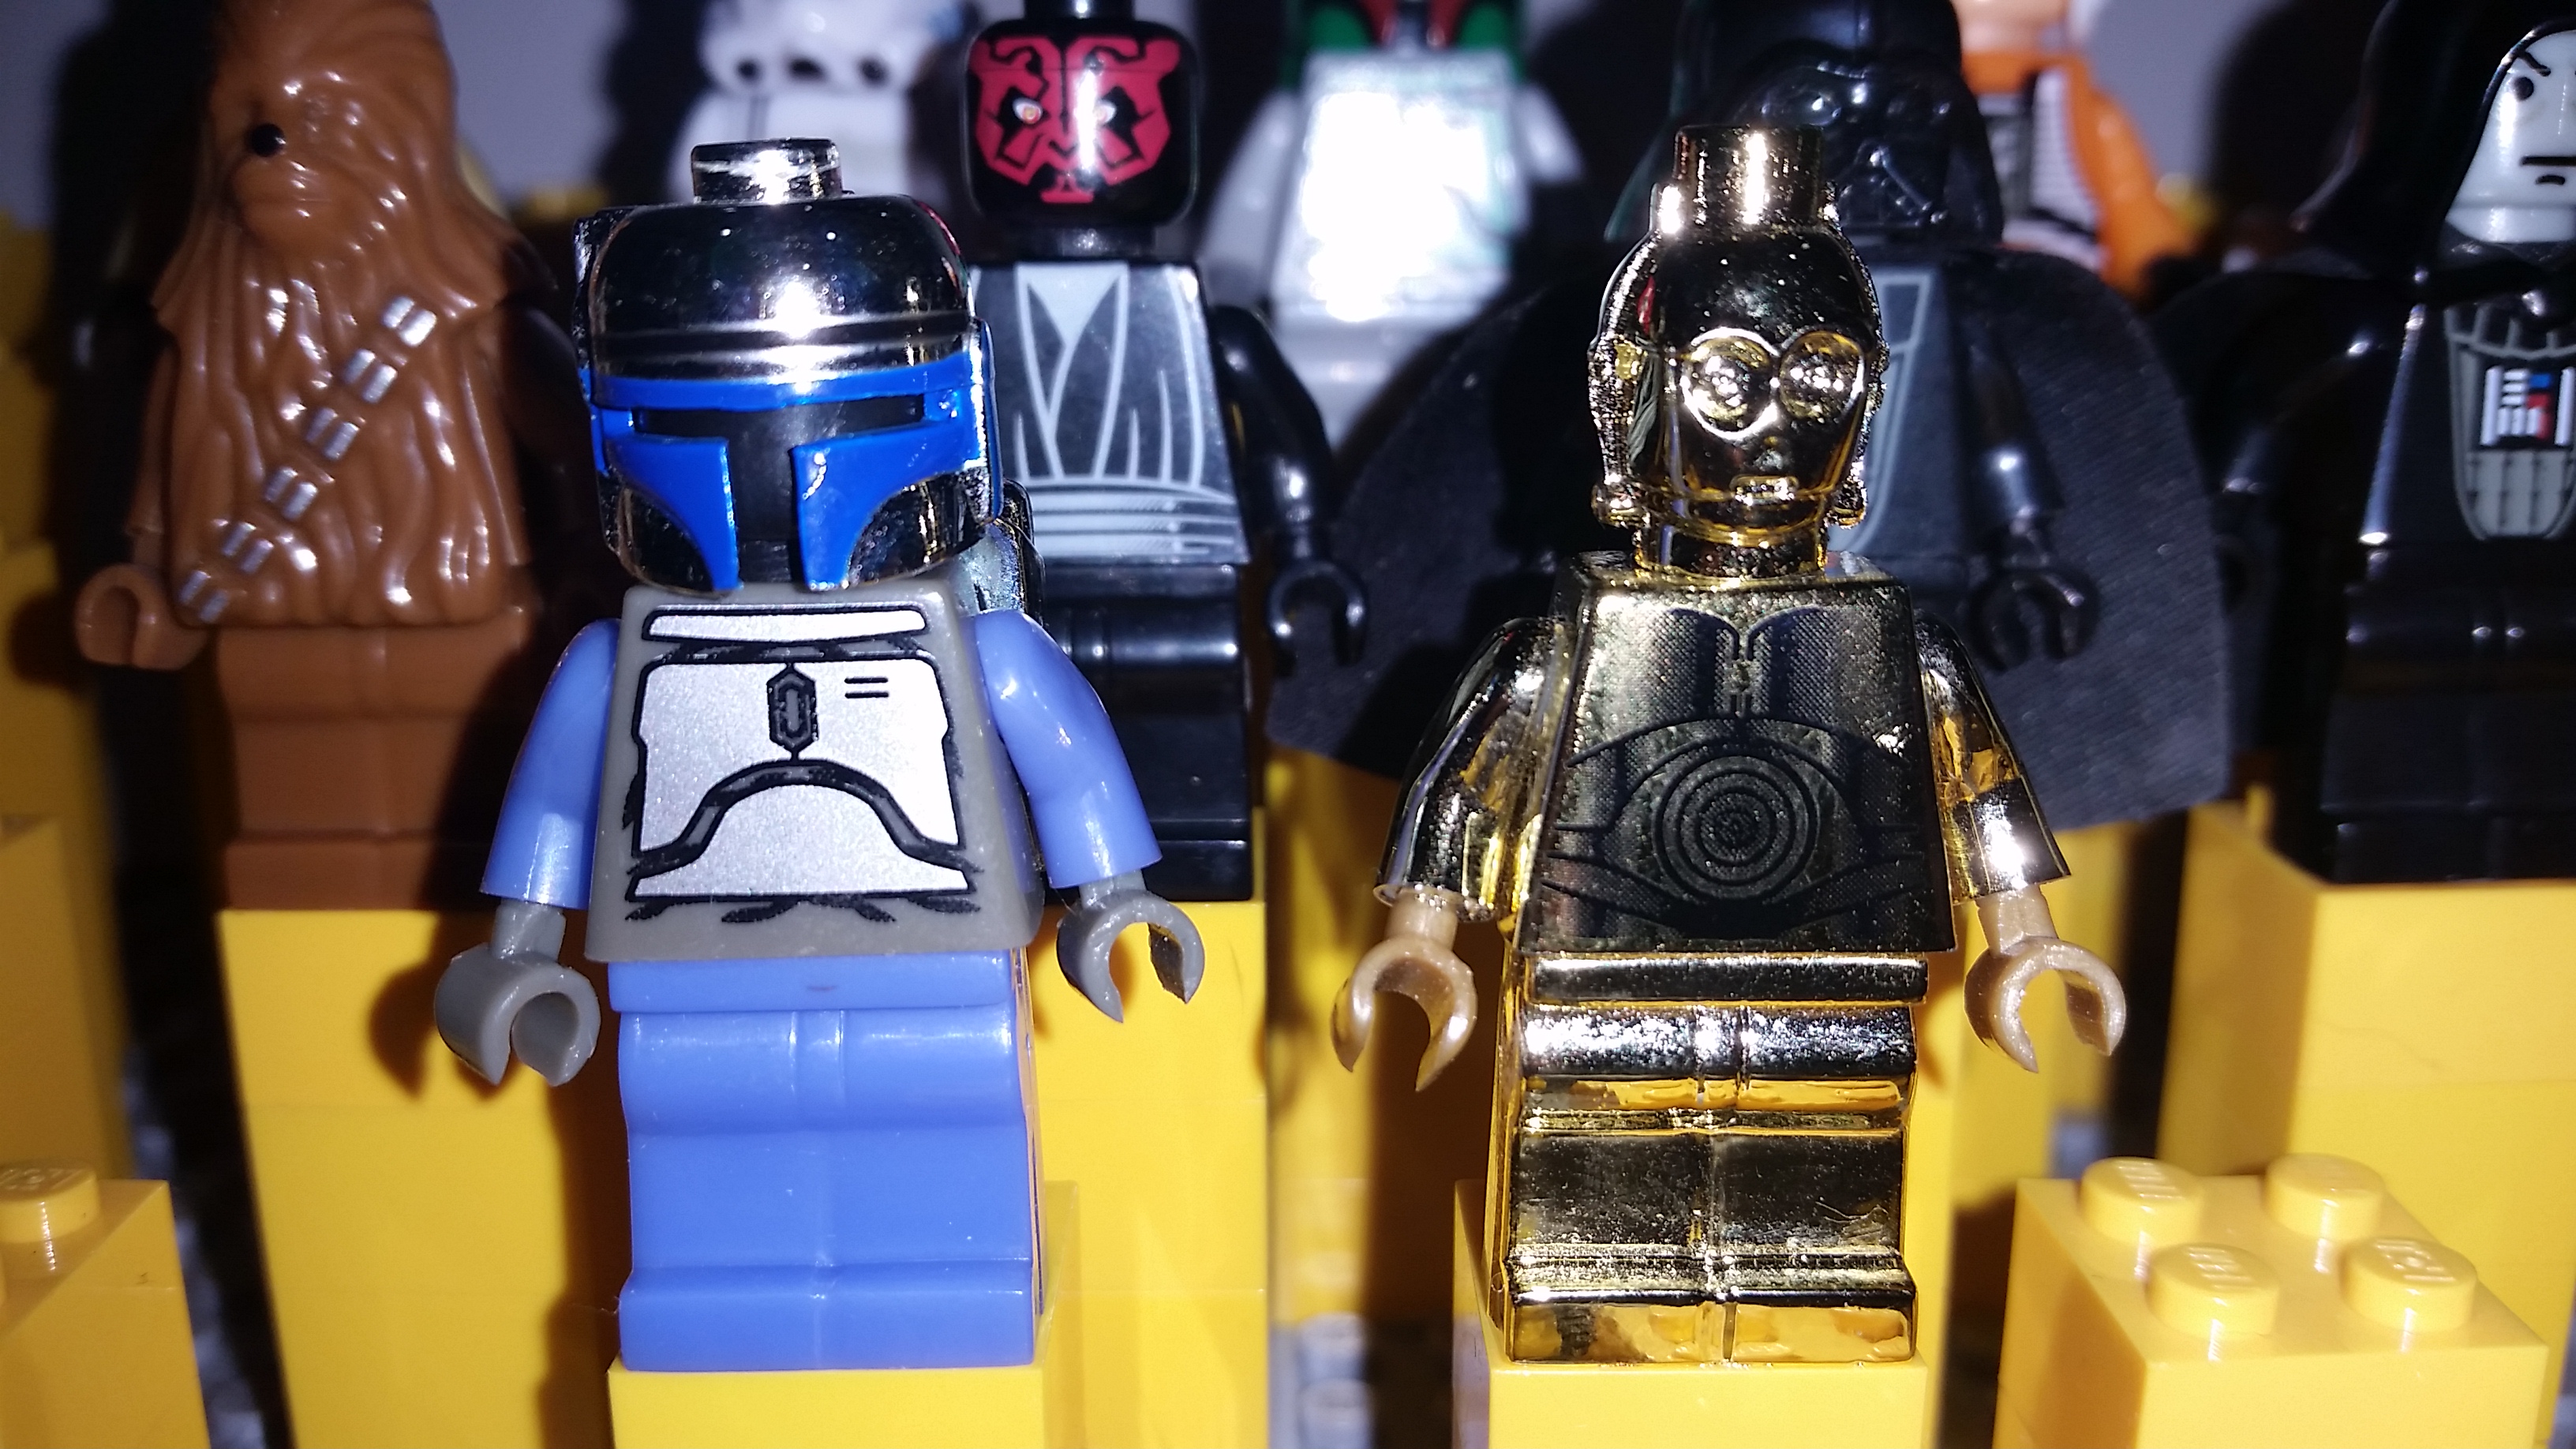 where to buy lego star wars minifigures